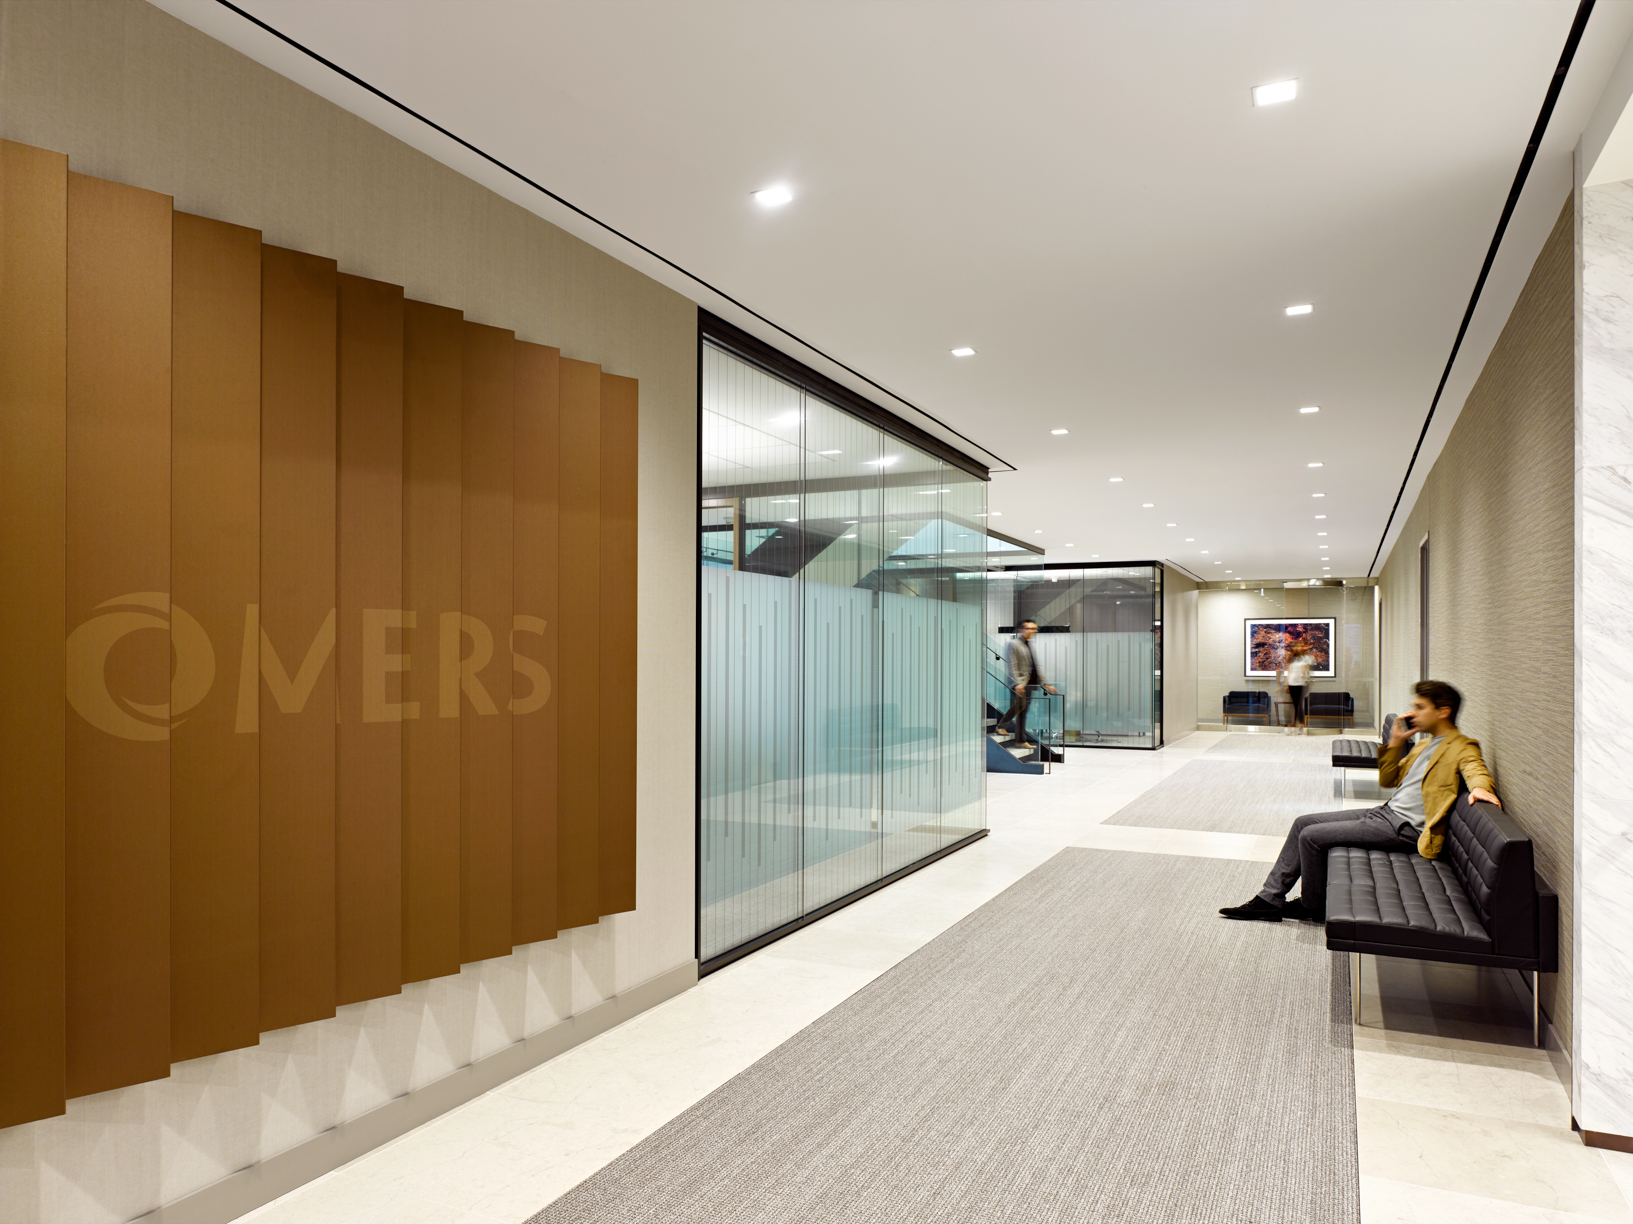 OMERS entrance with logo wall and glass partitions